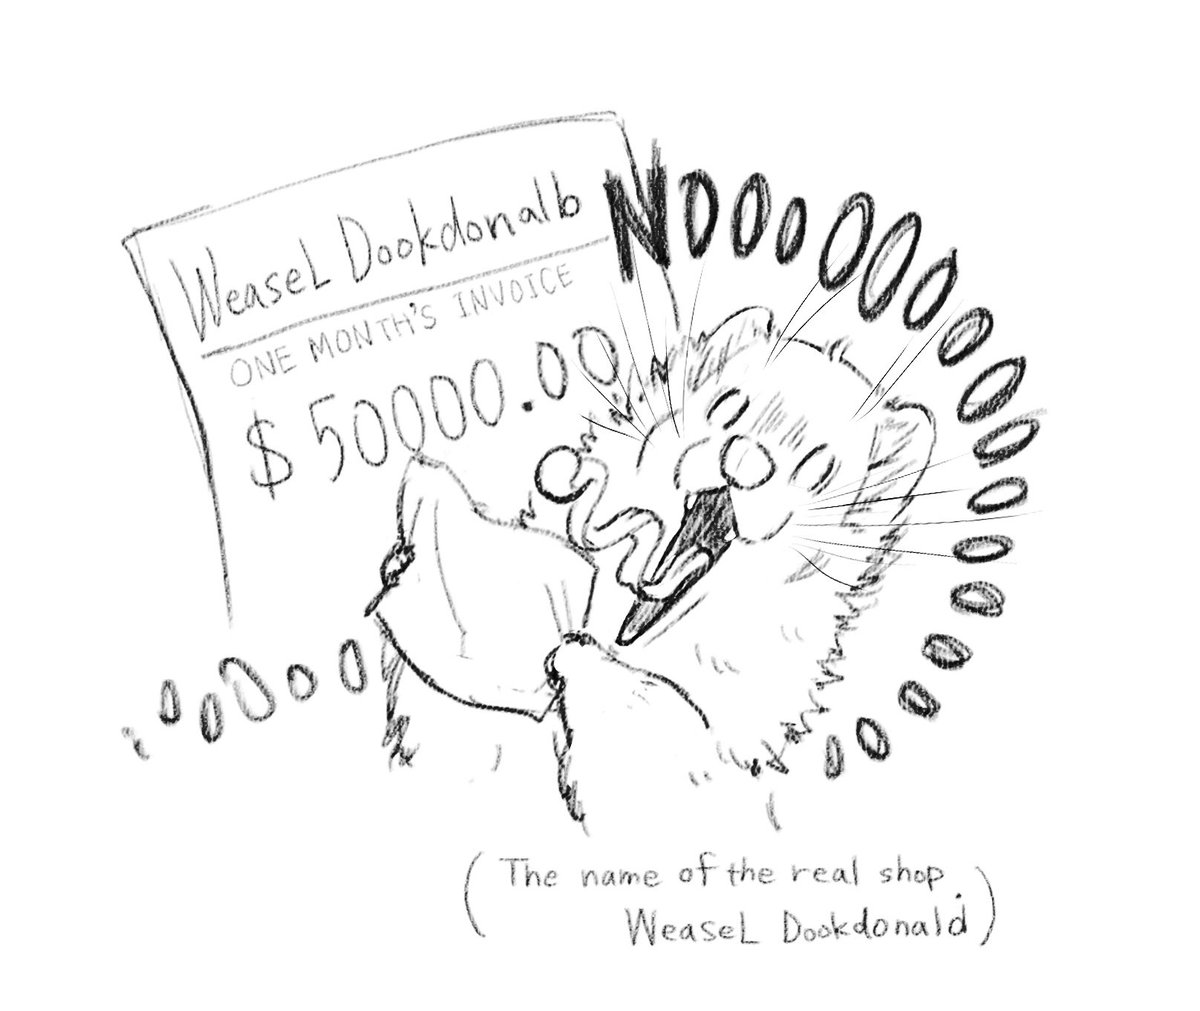 Requested Ferret doodle
"A screaming ferret looking at the price of a bill" 